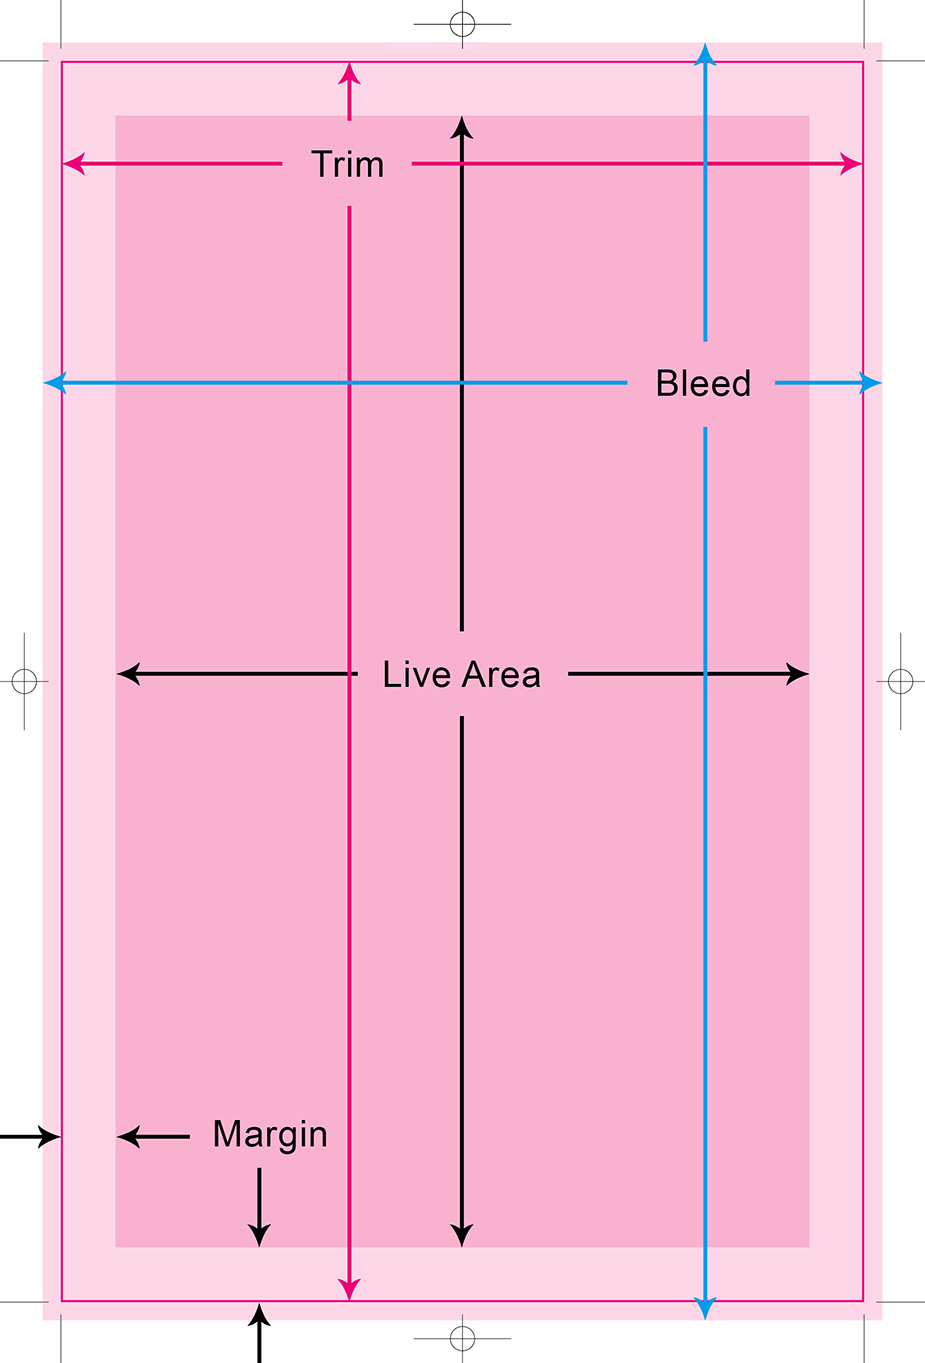 Live Area, Margins, and Bleeds